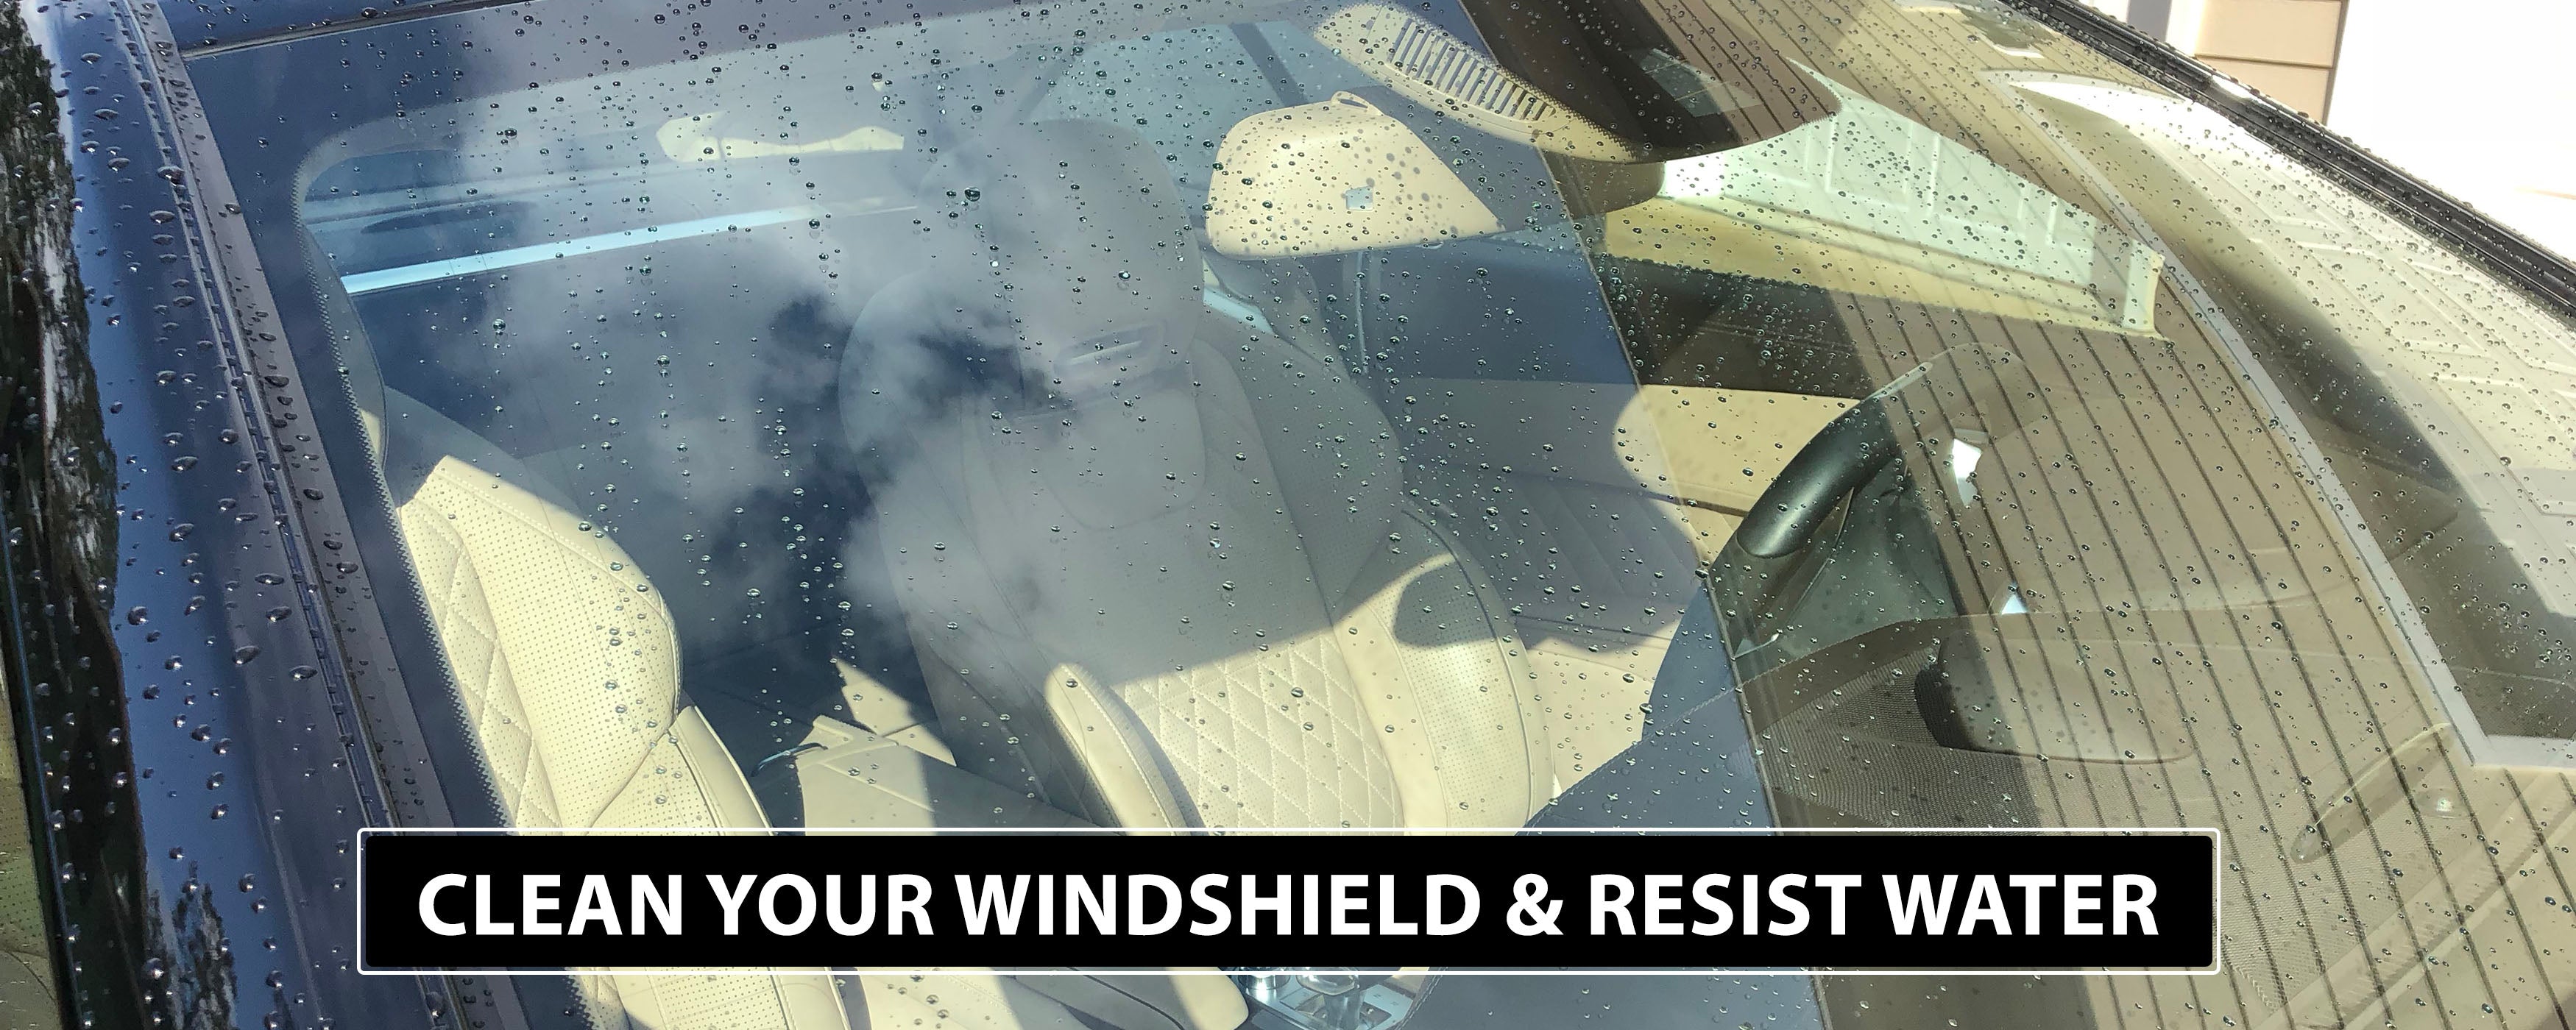 How To Properly Clean Your Windshield & Make It Hydrophobic To Bead/Resist Rainwater